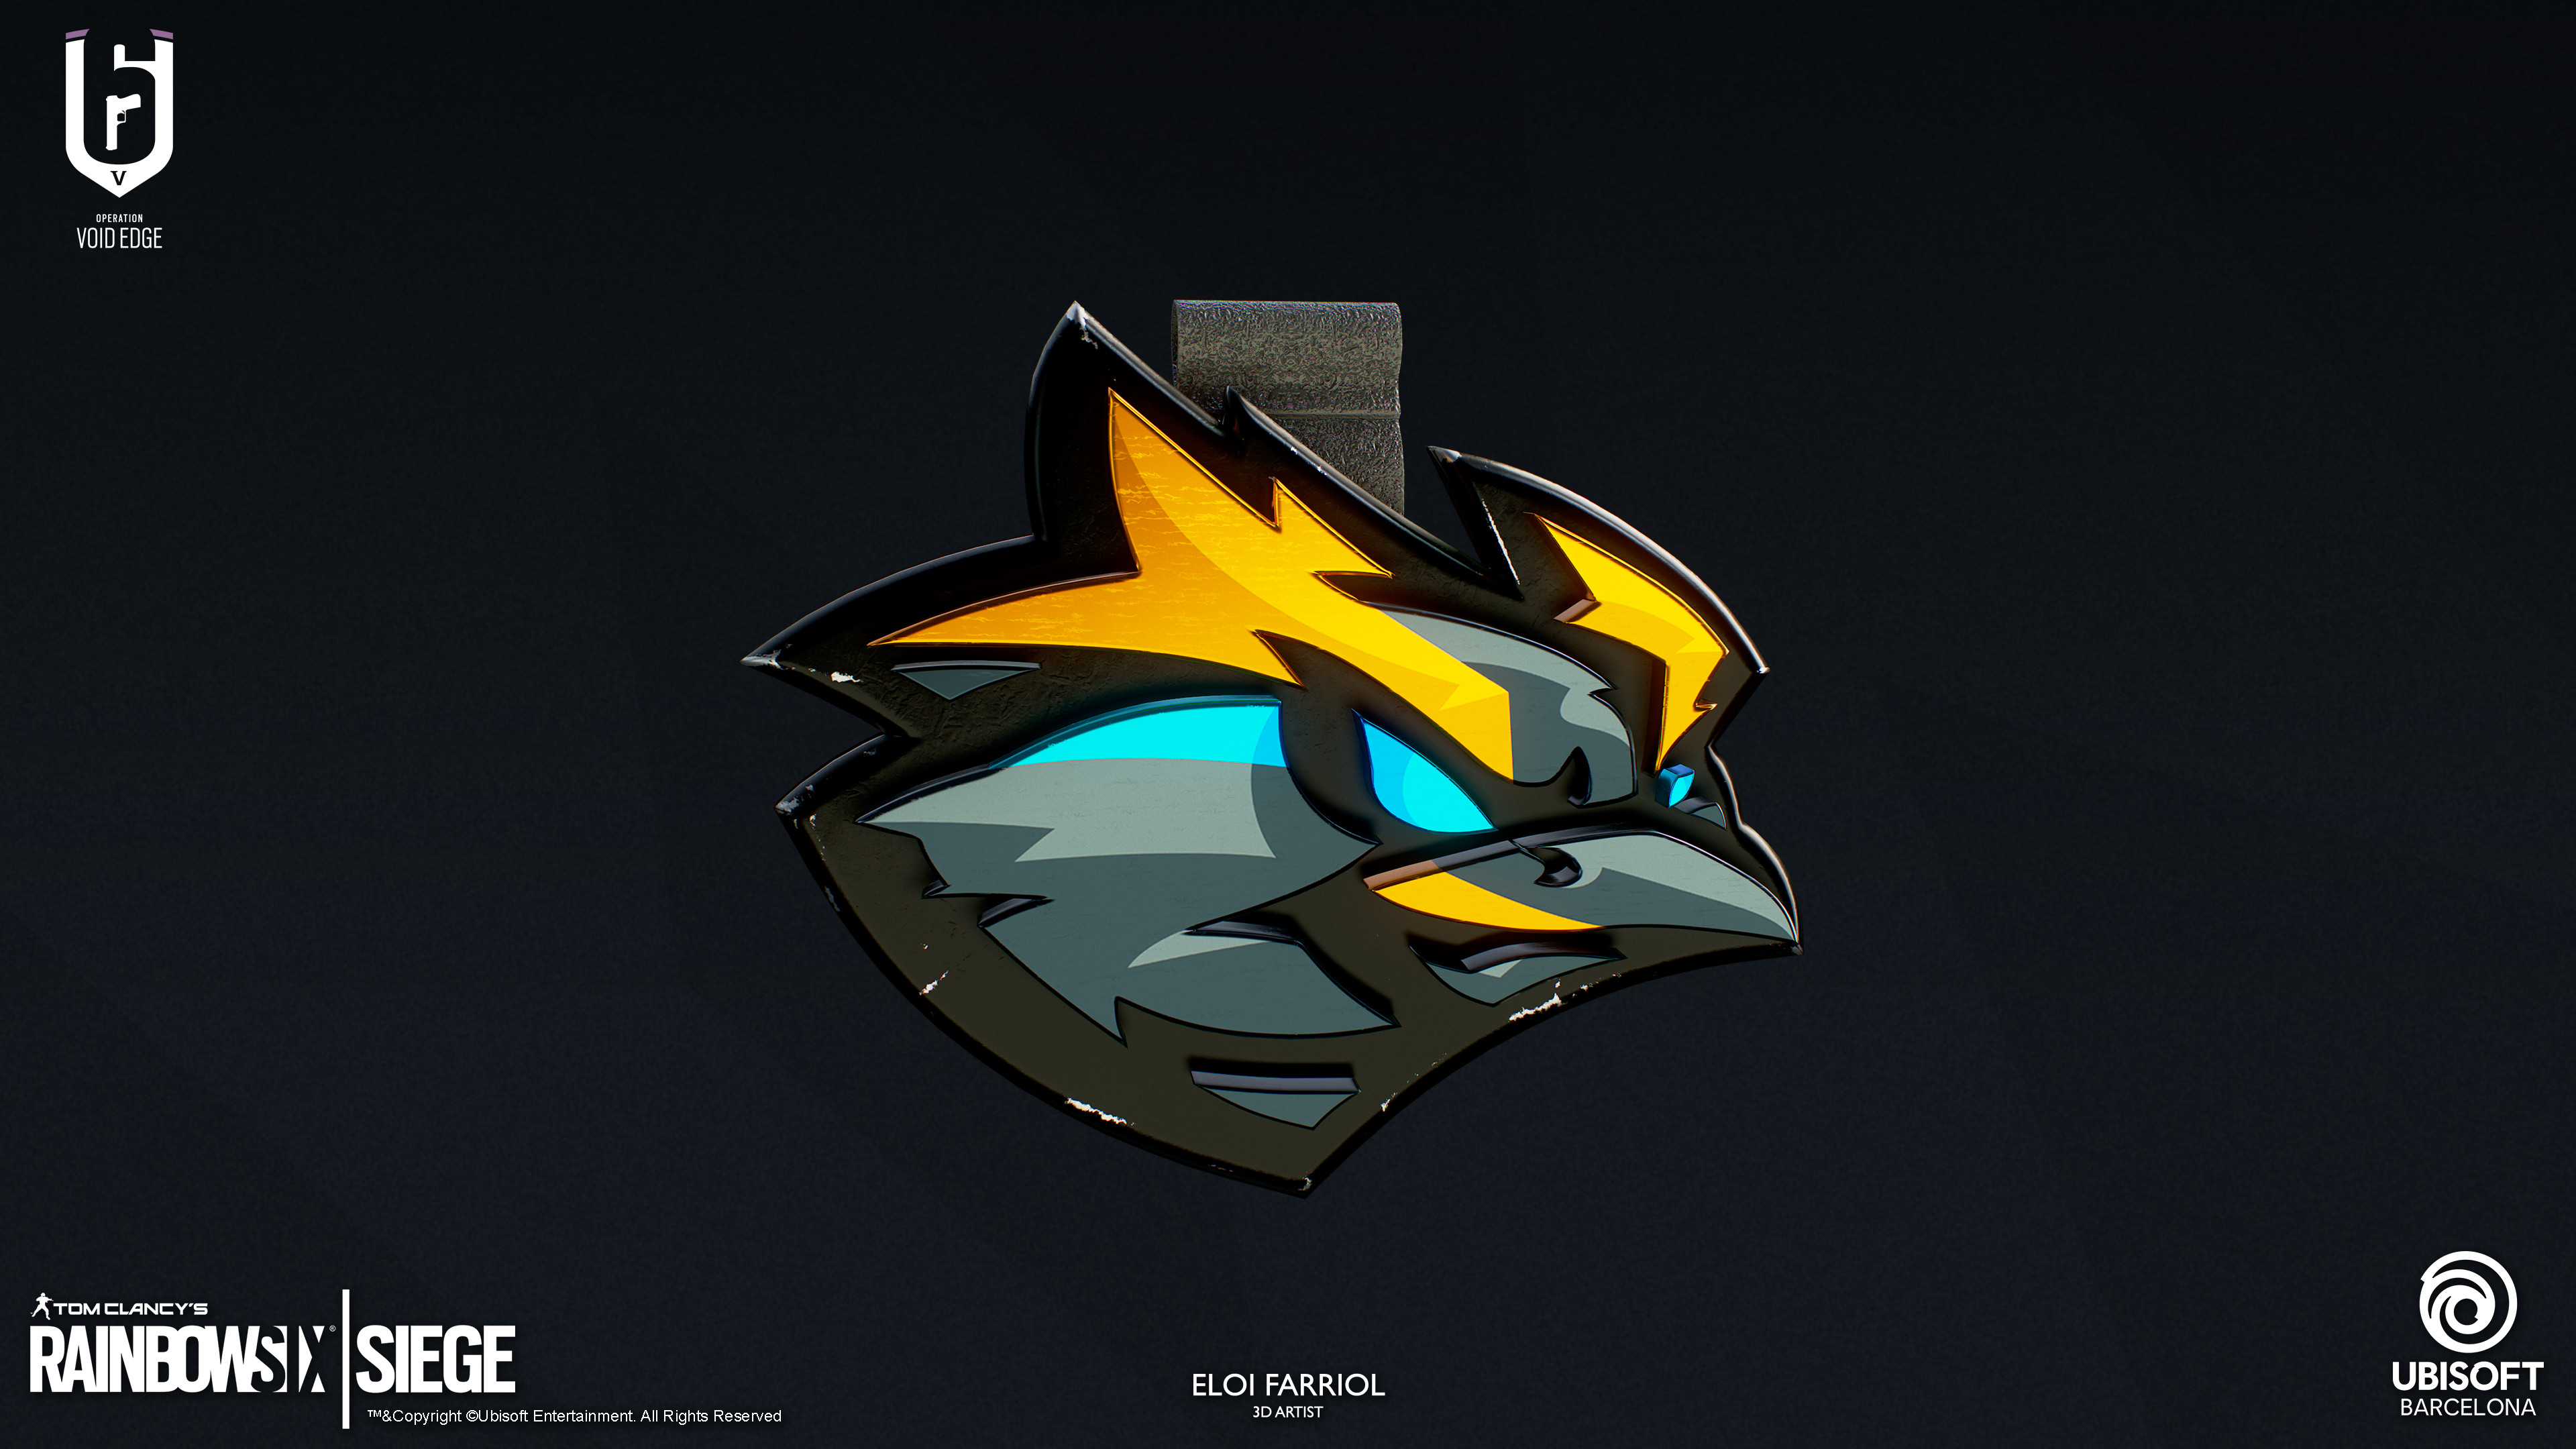 Pengu charm. Proleague player for G2 and streamer.